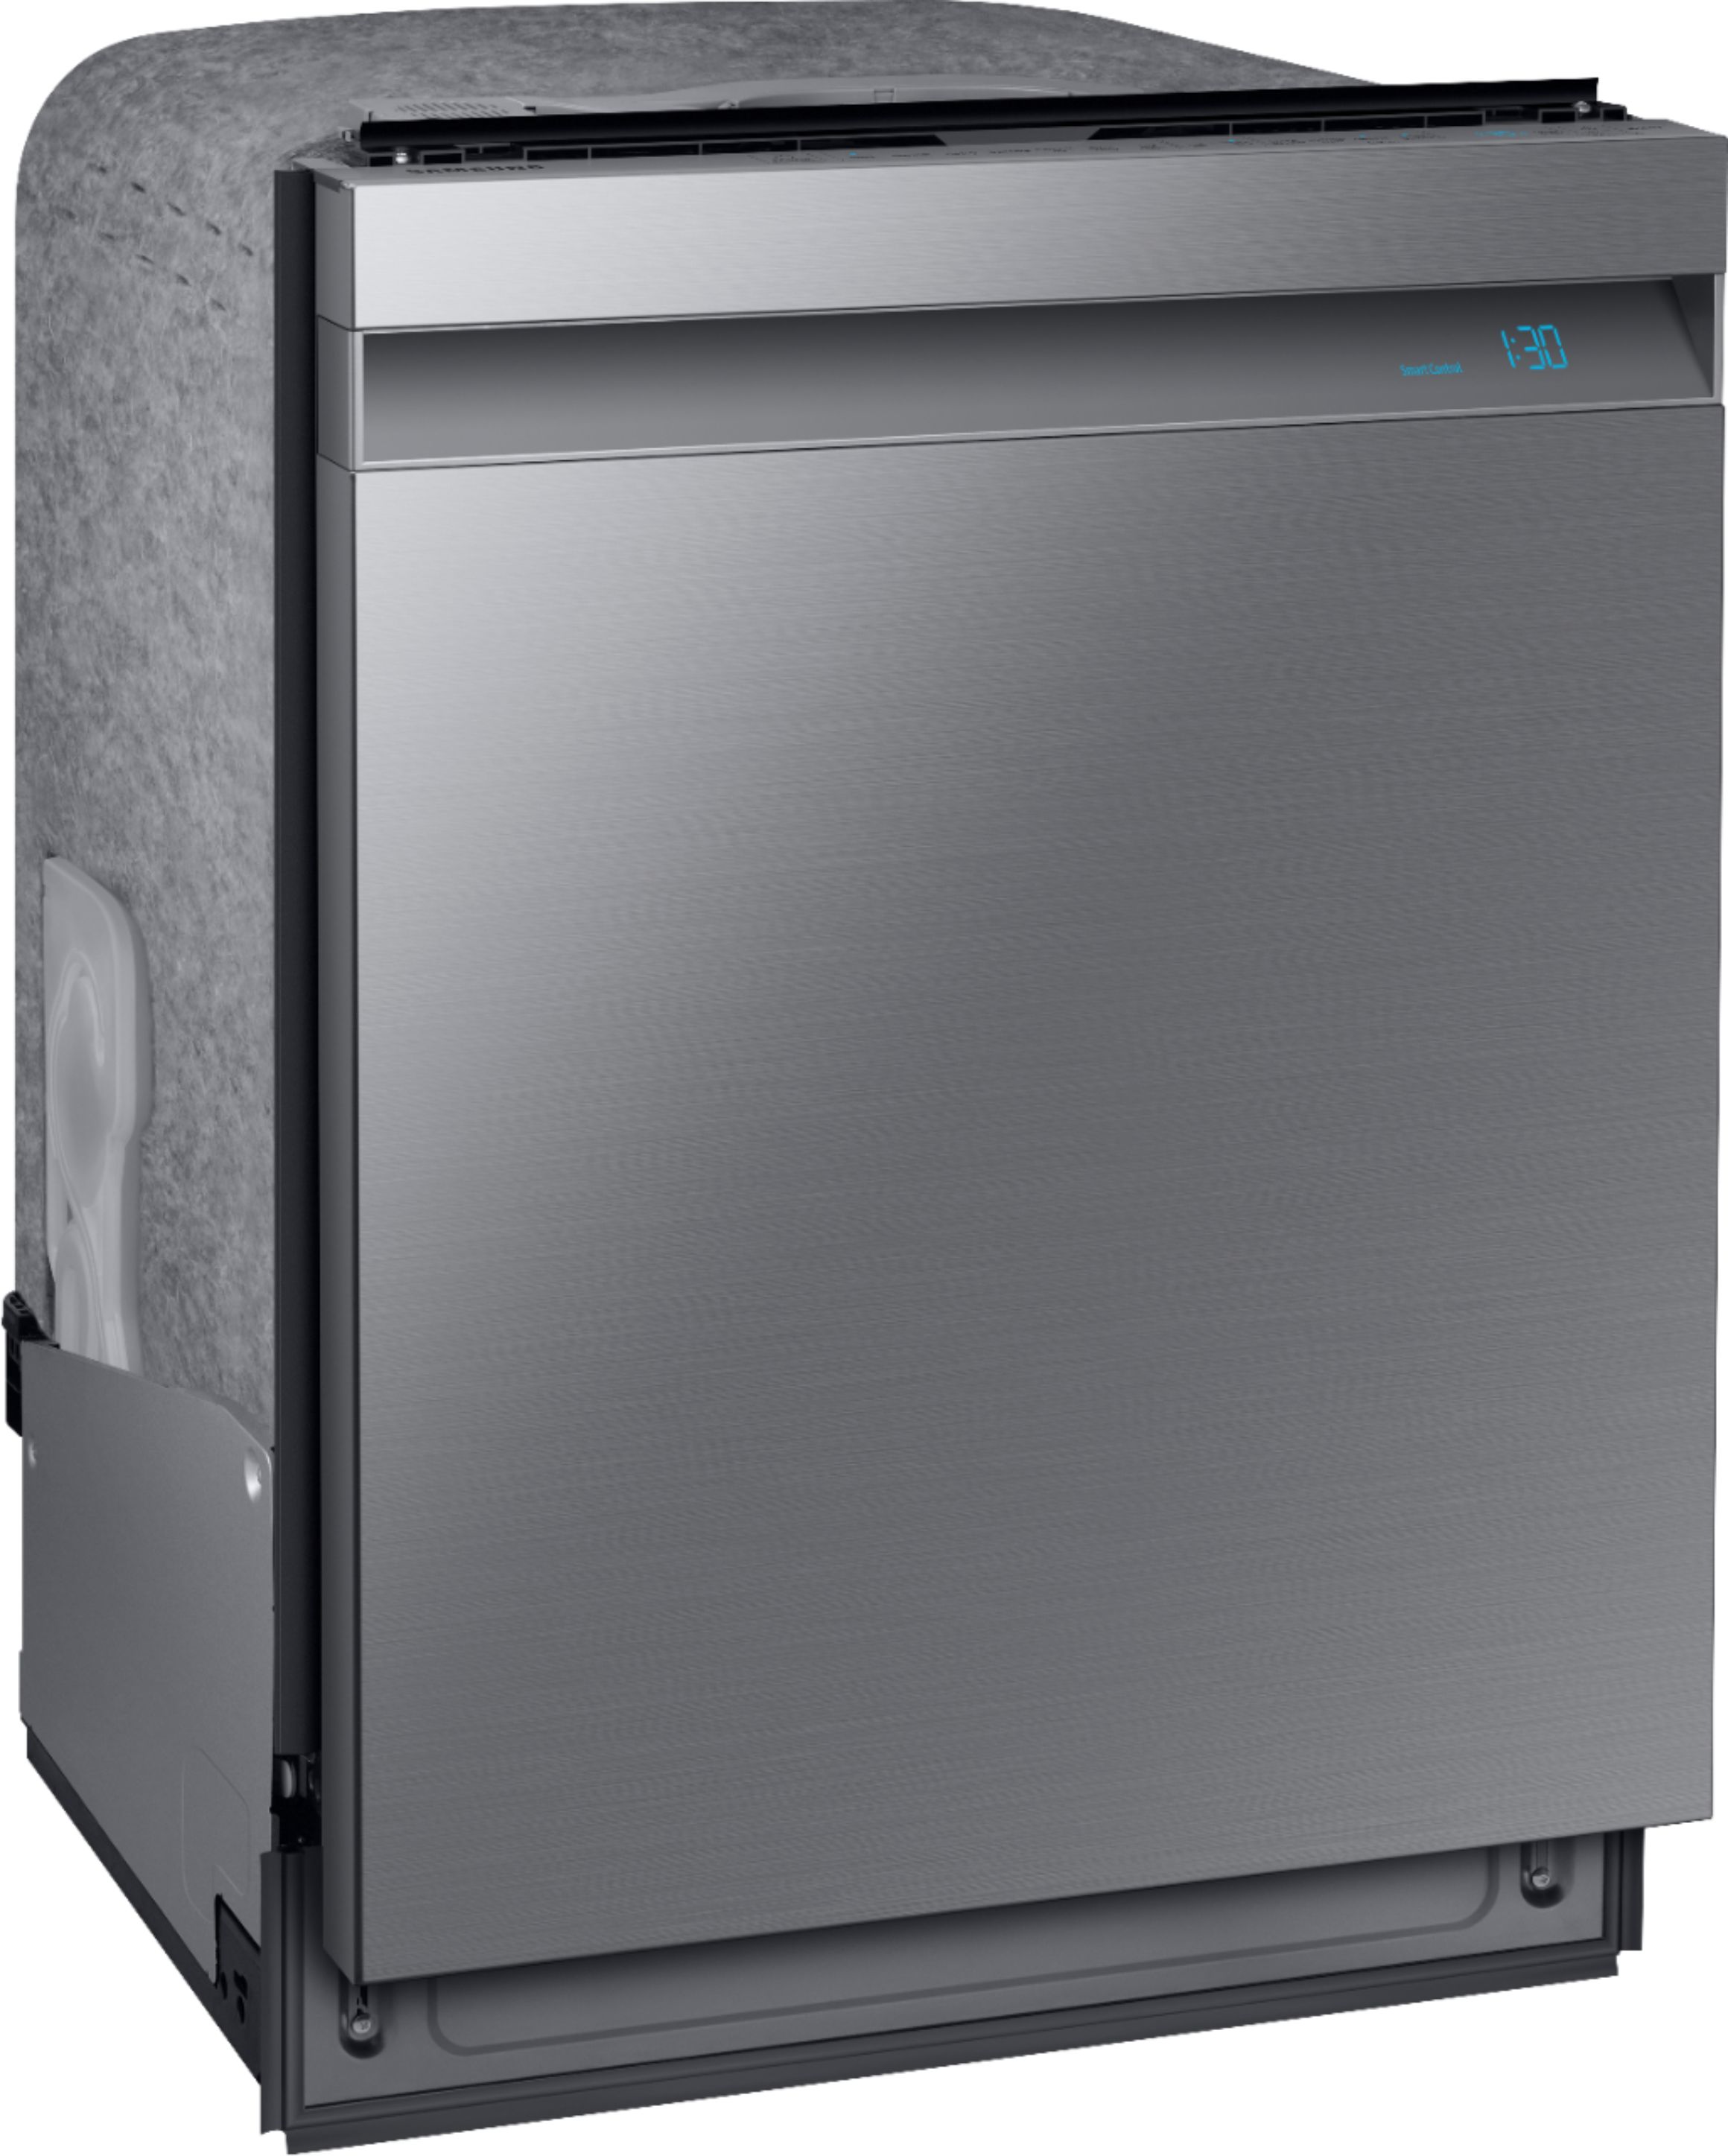 Angle View: Samsung - 18" Compact Top Control Built-in Dishwasher with Stainless Steel Tub, 46 dBA - Stainless steel